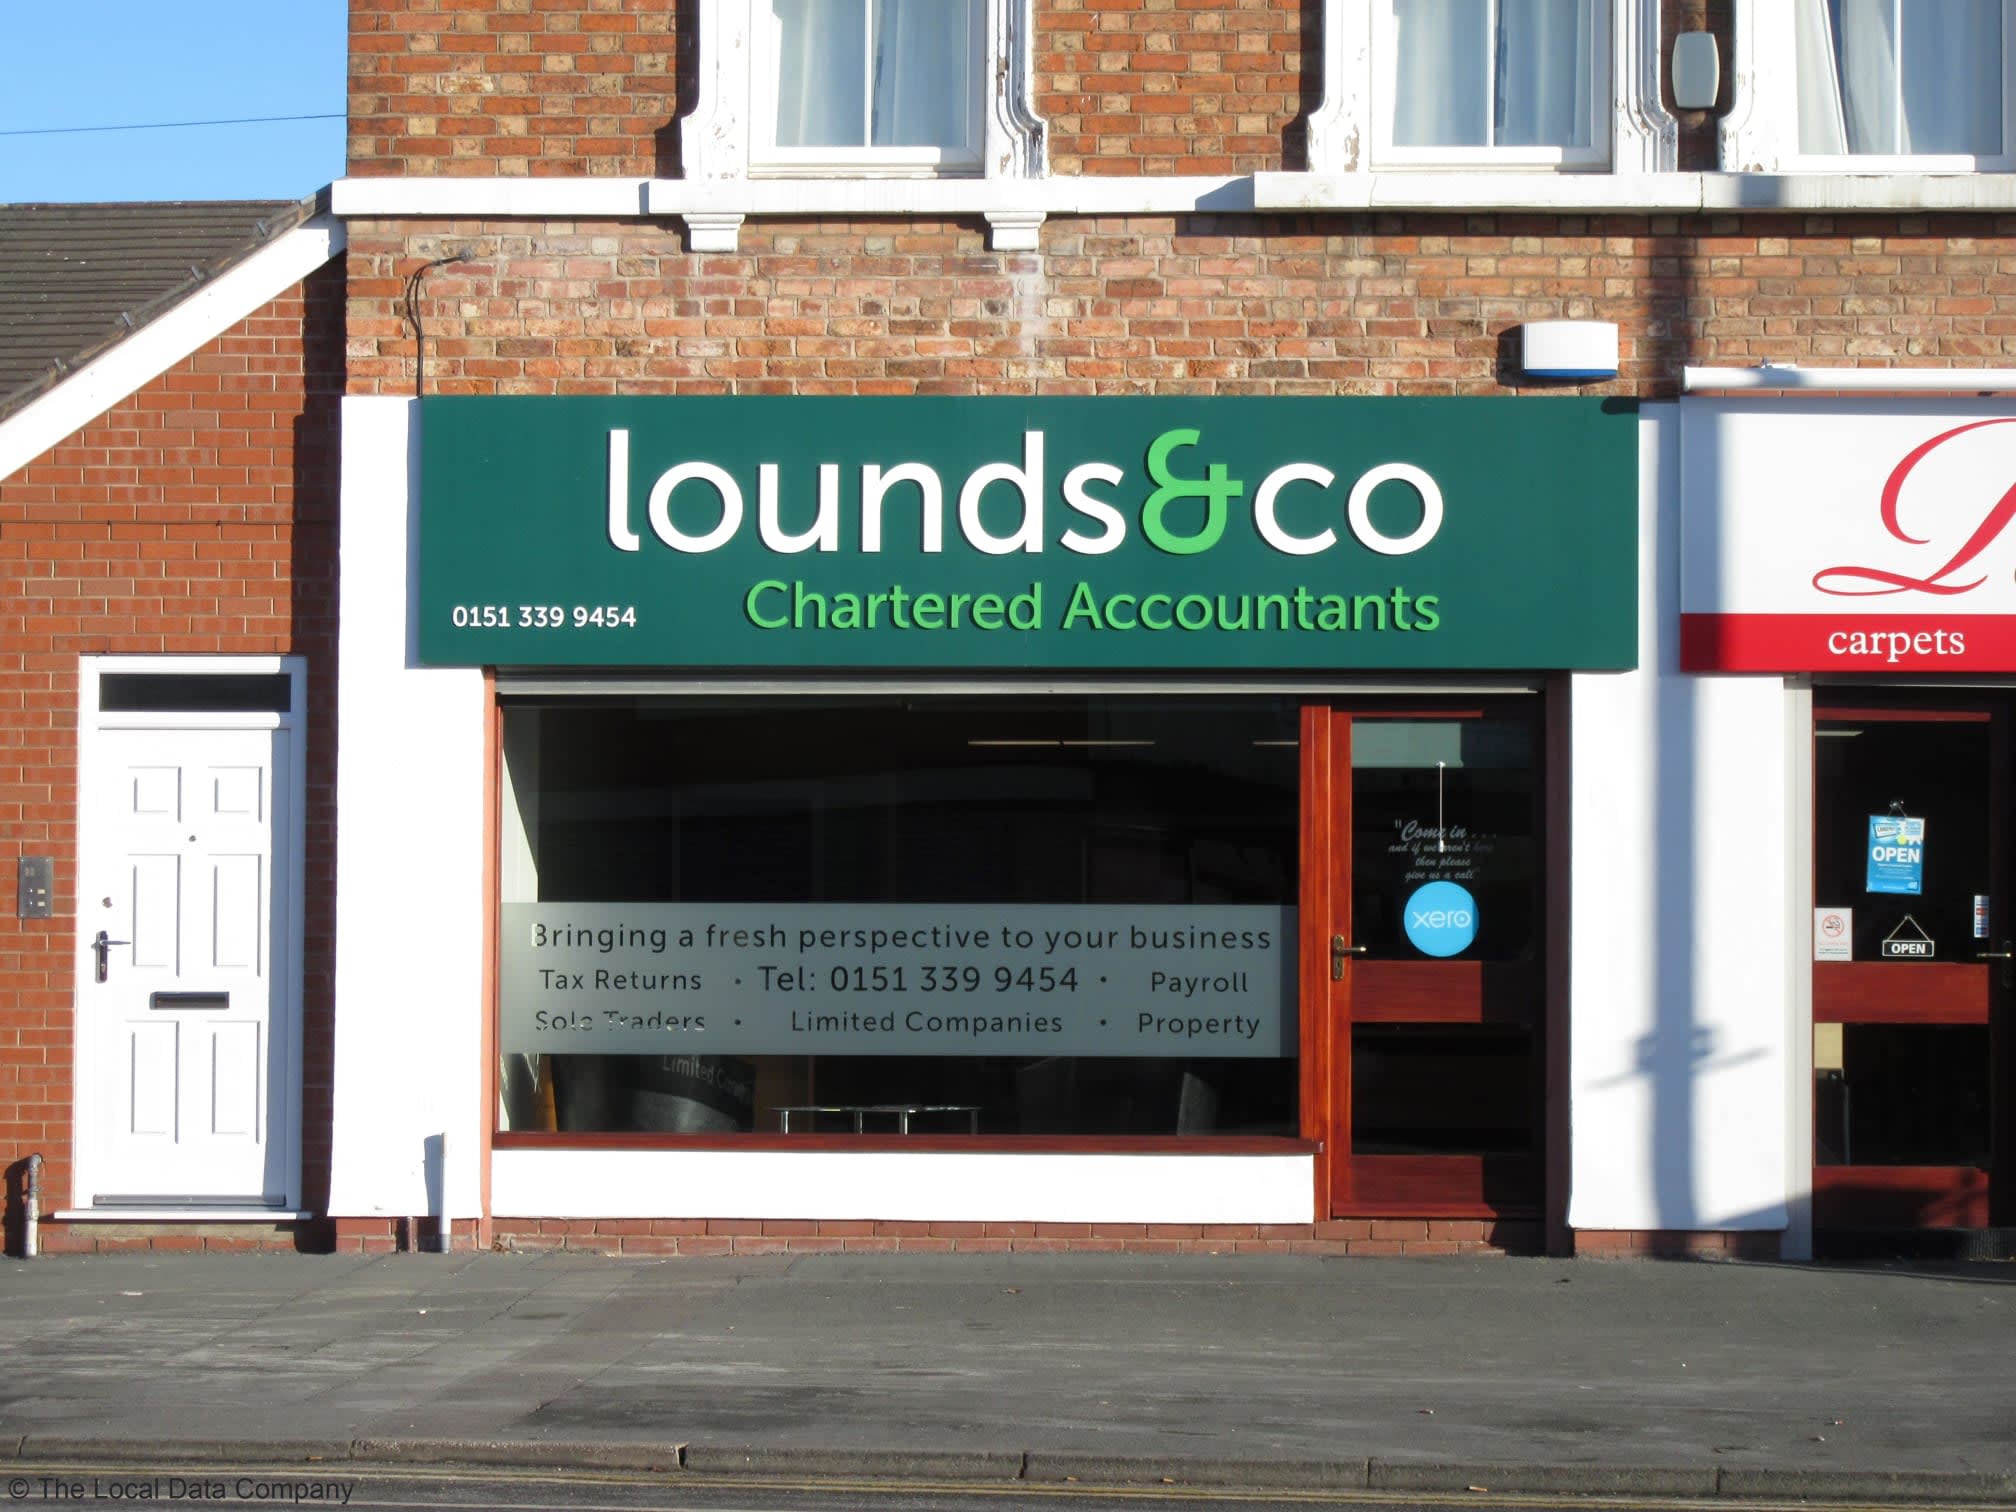 Images Lounds & Co Chartered Accountants